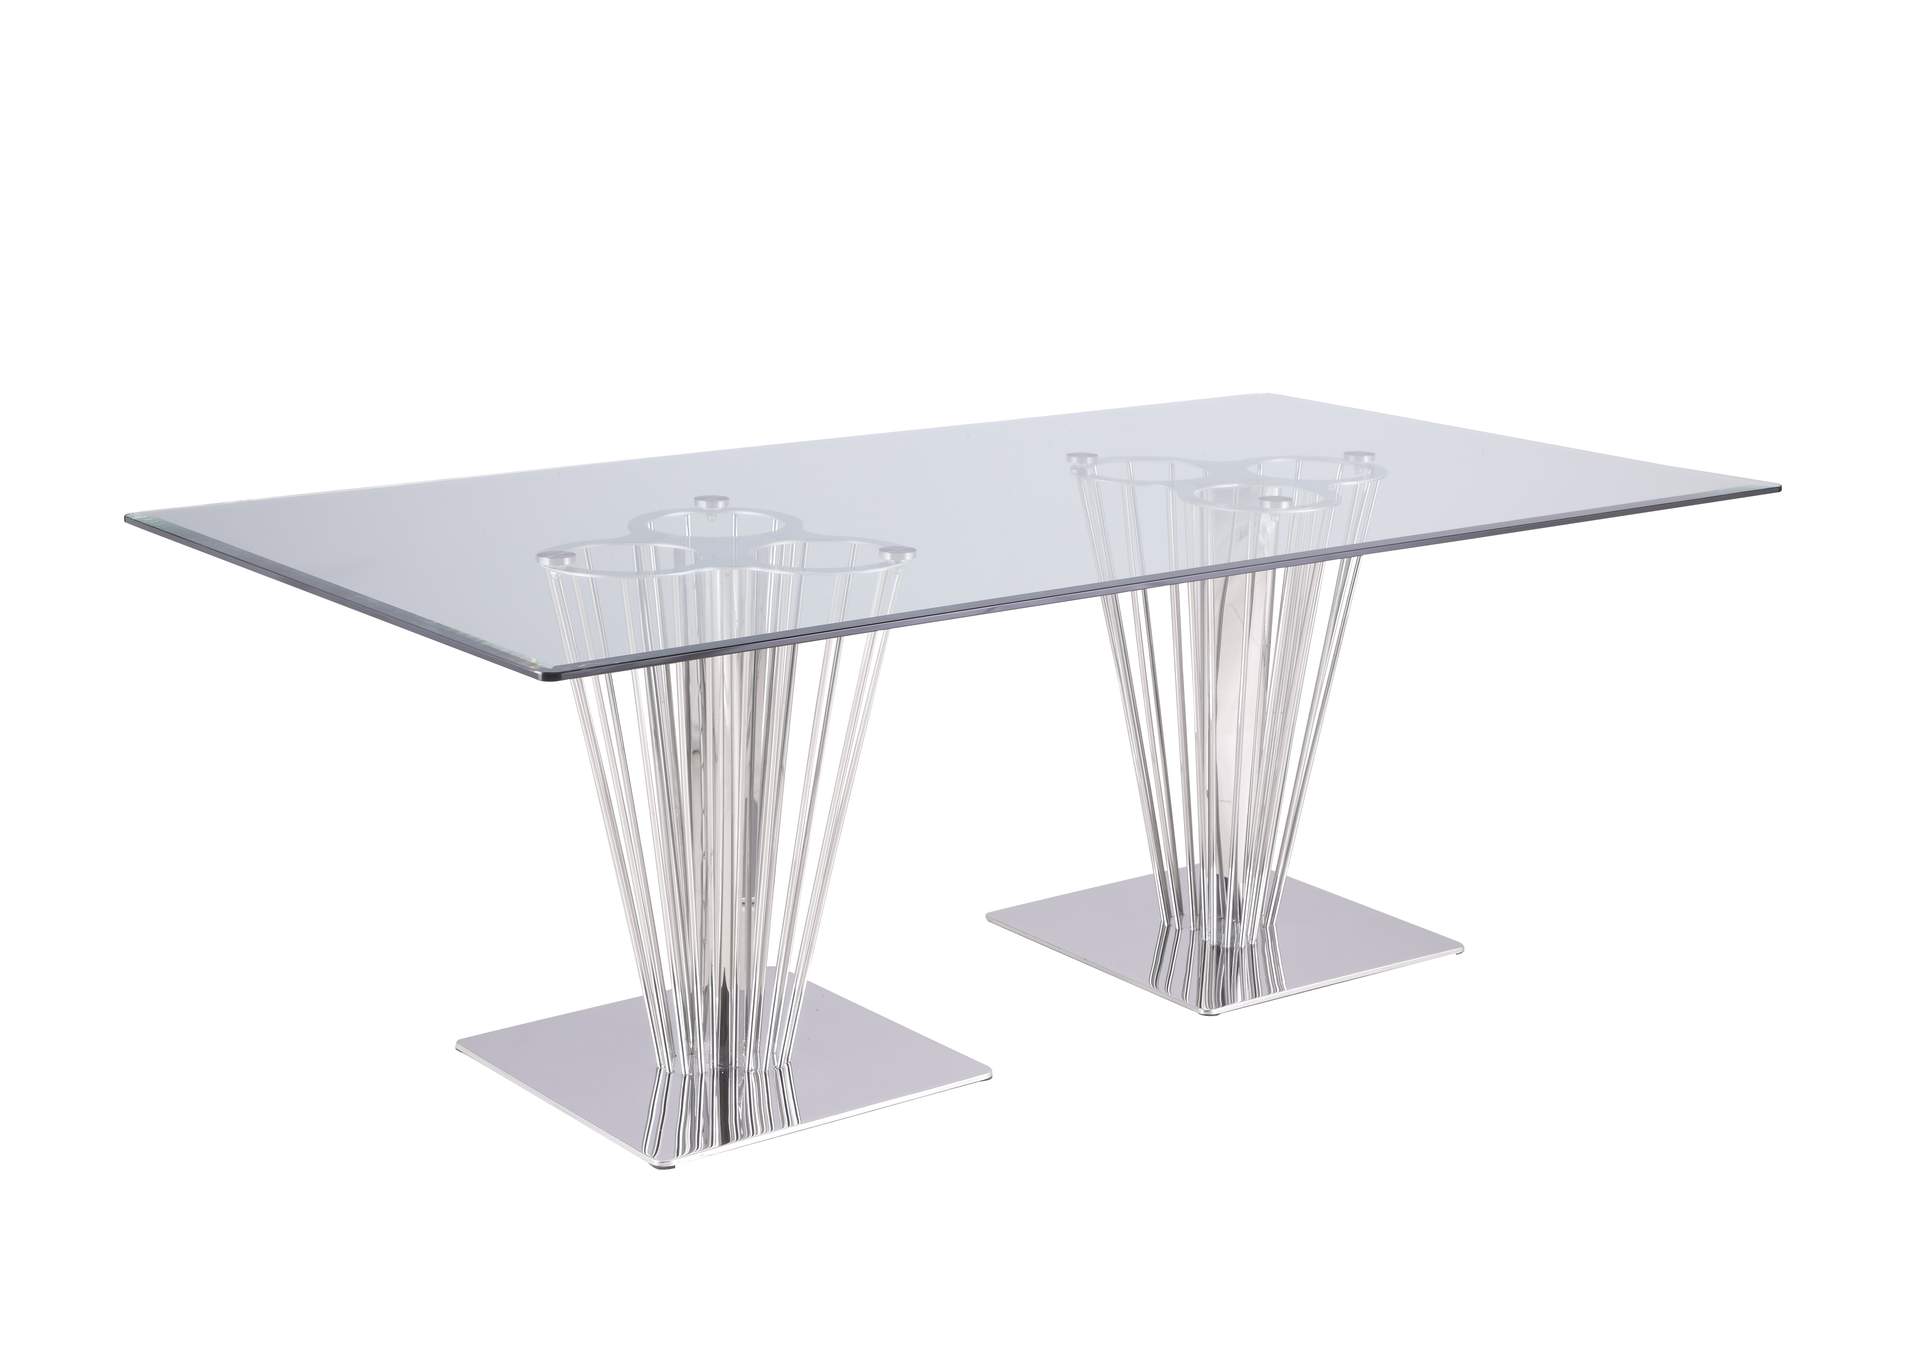 Contemporary Rectangular Glass Dining Table,Chintaly Imports